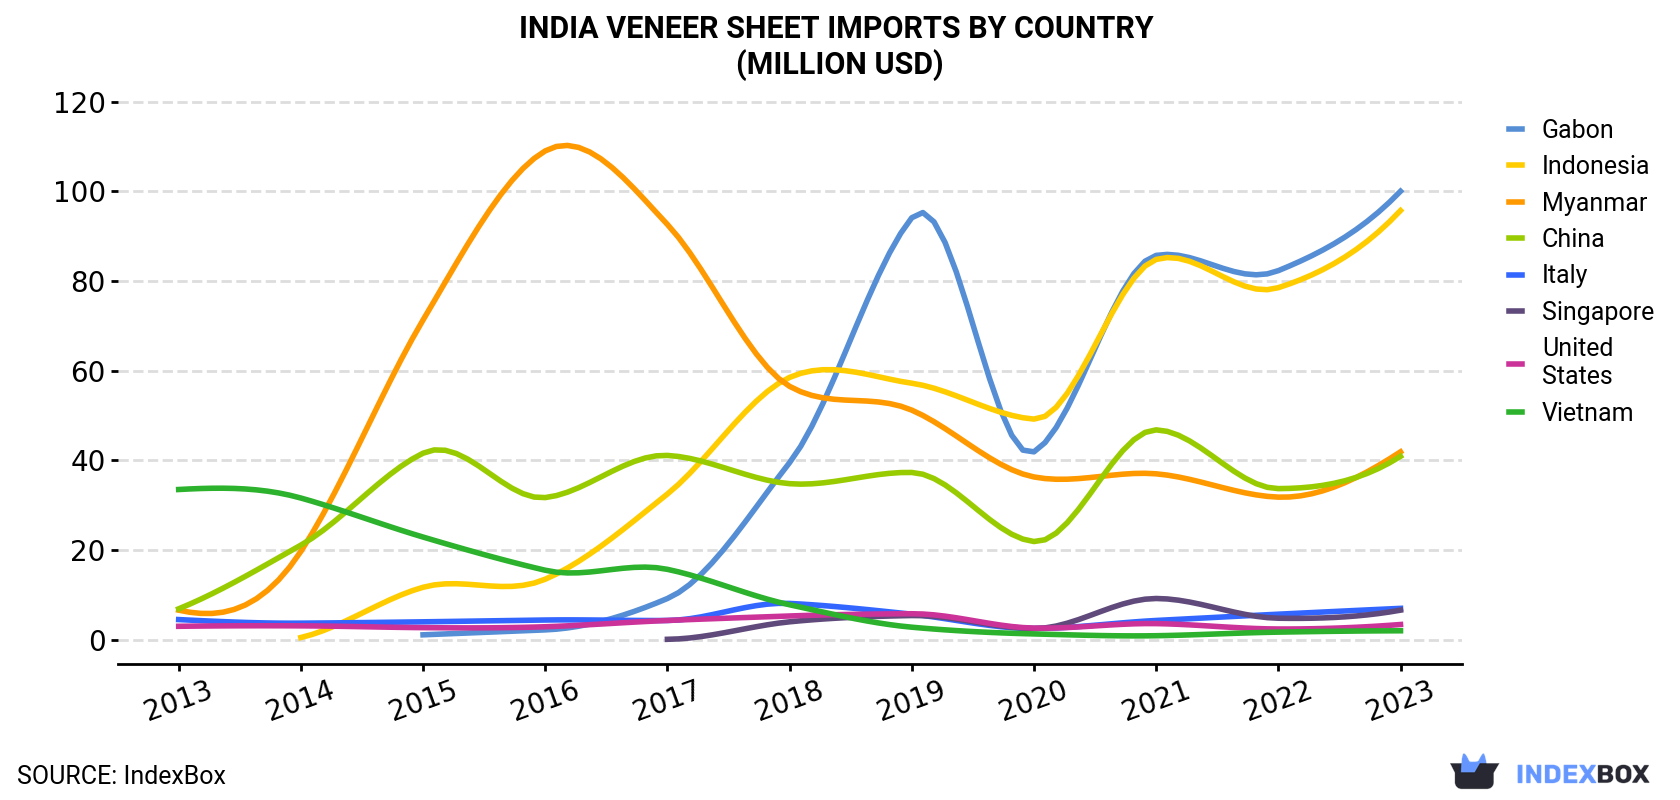 India Veneer Sheet Imports By Country (Million USD)